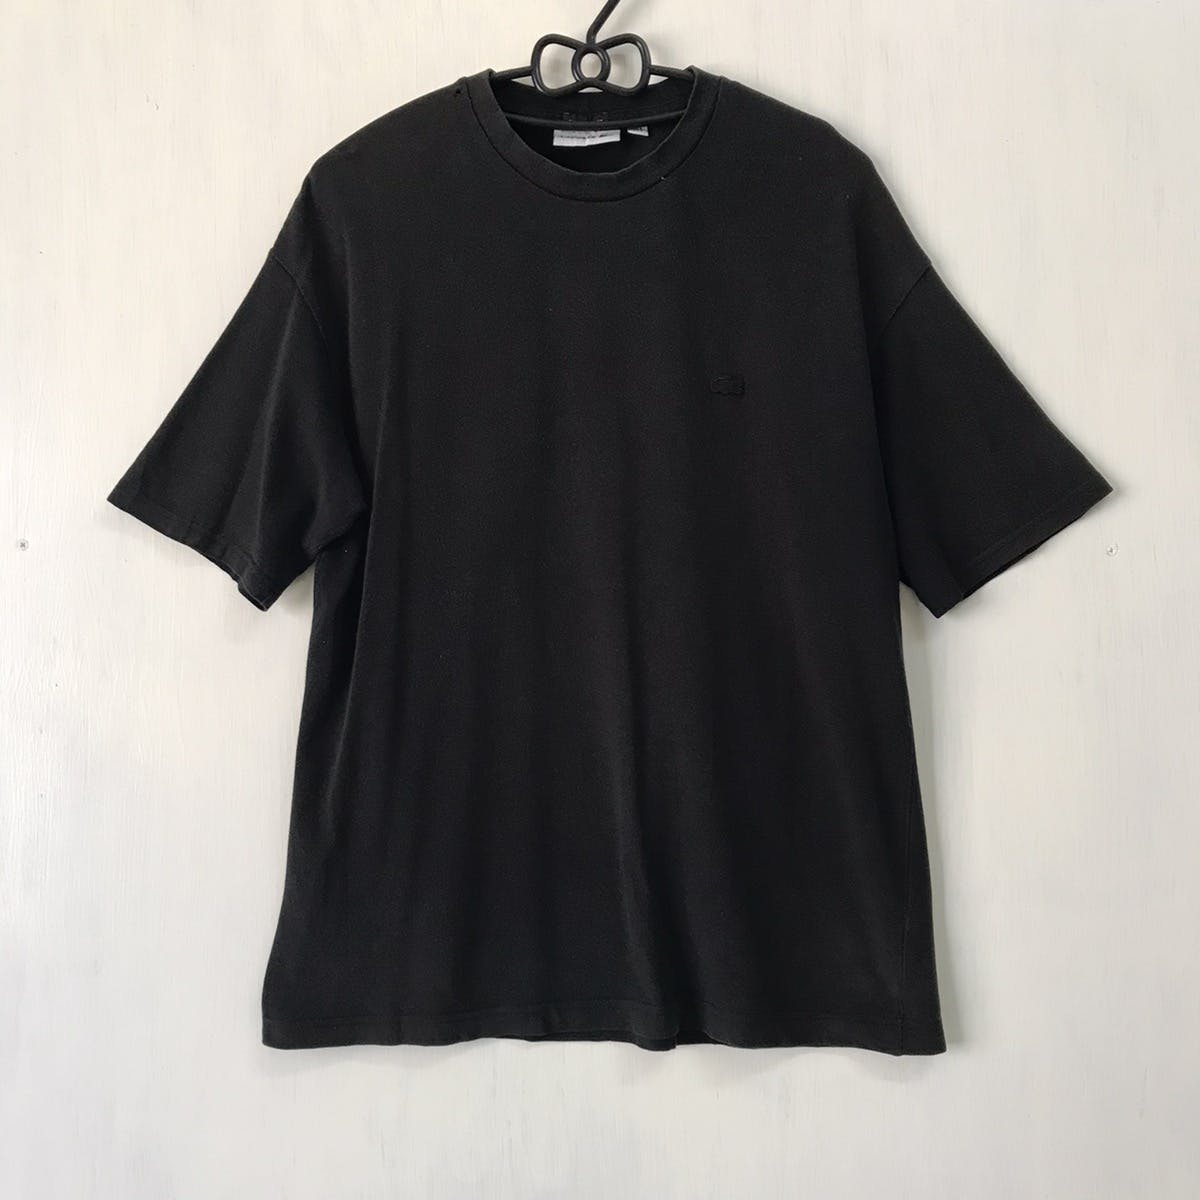 Lacoste exclusive edition tshirt (sun faded) - 1